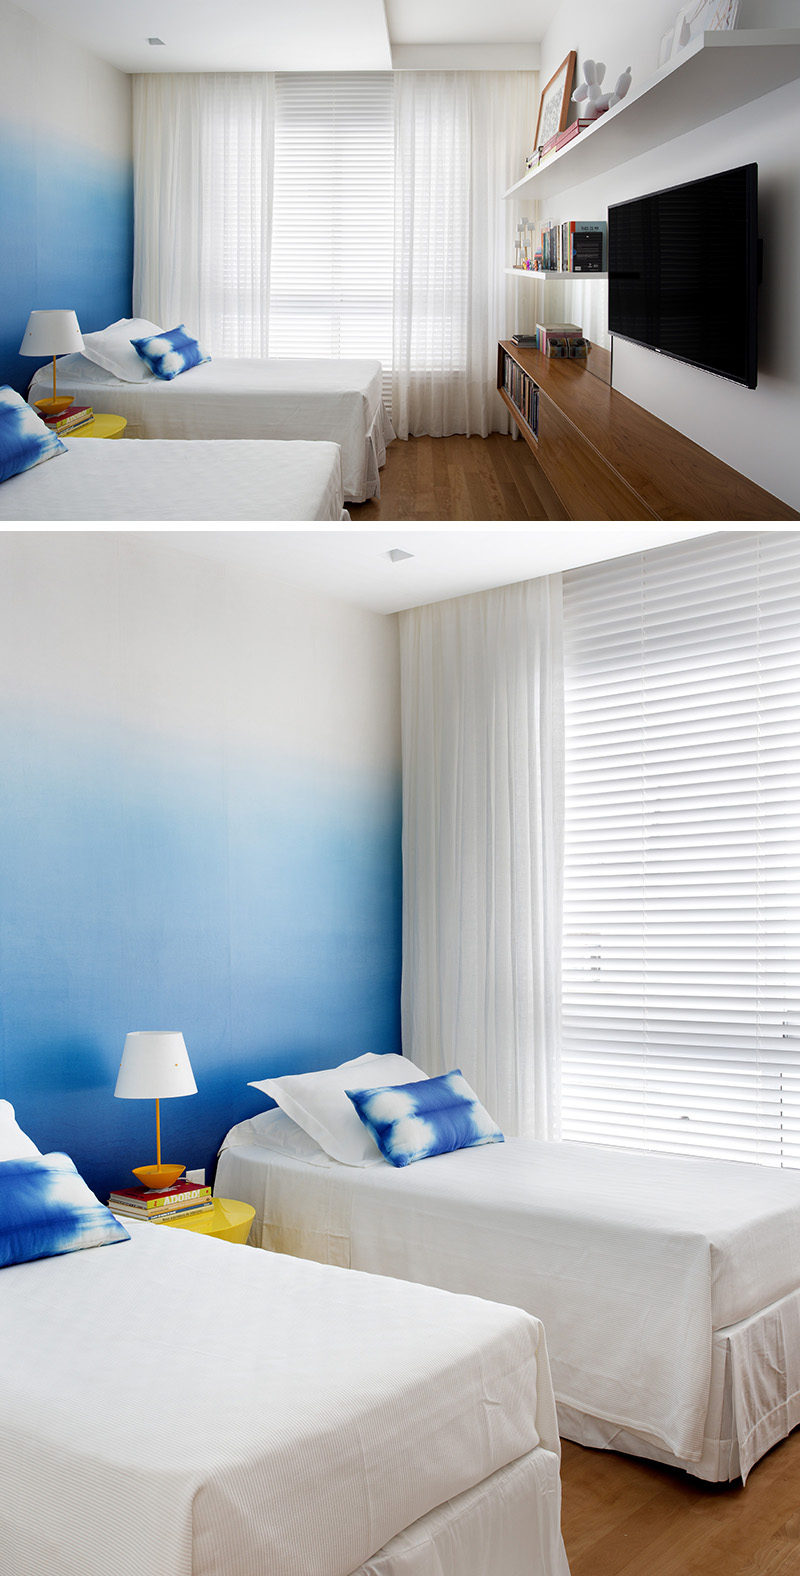 Bedroom Design Ideas - The designers of this apartment used an ombre wallpaper in the bedroom to create an accent wall that's stylish and less overpowering than a full blue wall. 蓝色渐变墙搭配白色的卧室